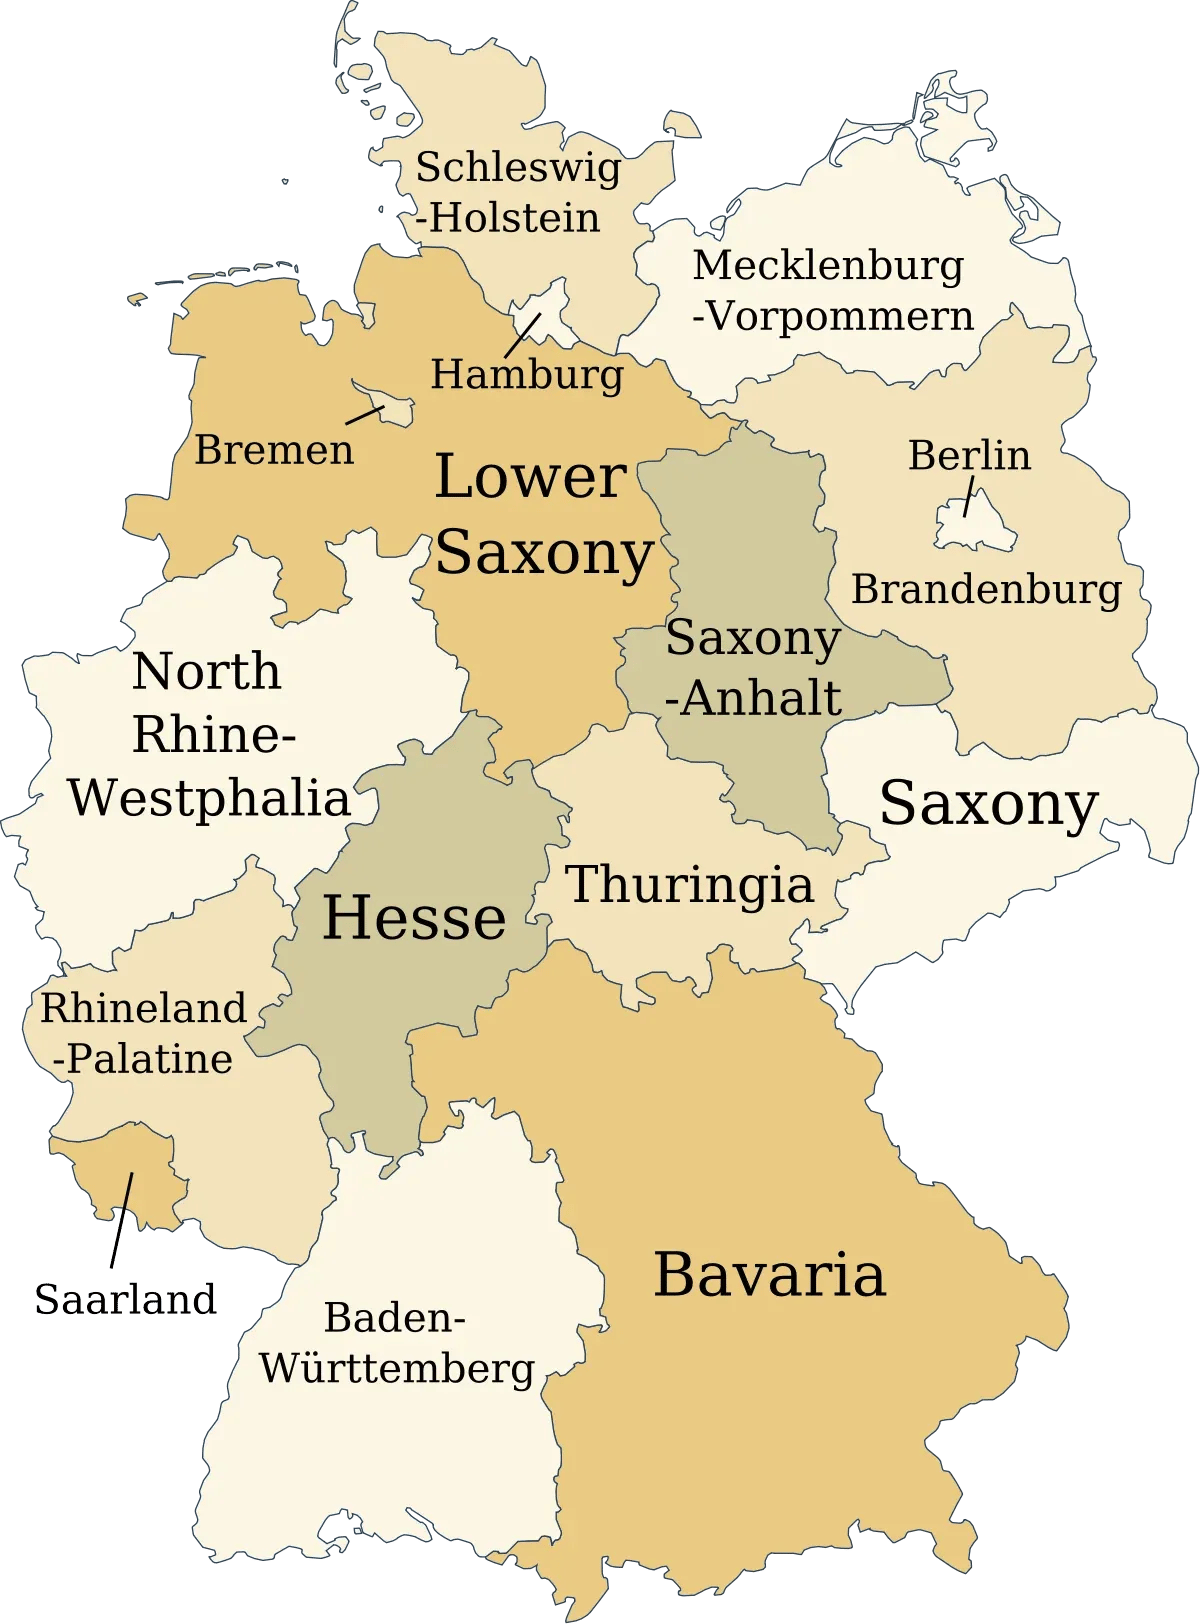 The 16 States of Germany - with map